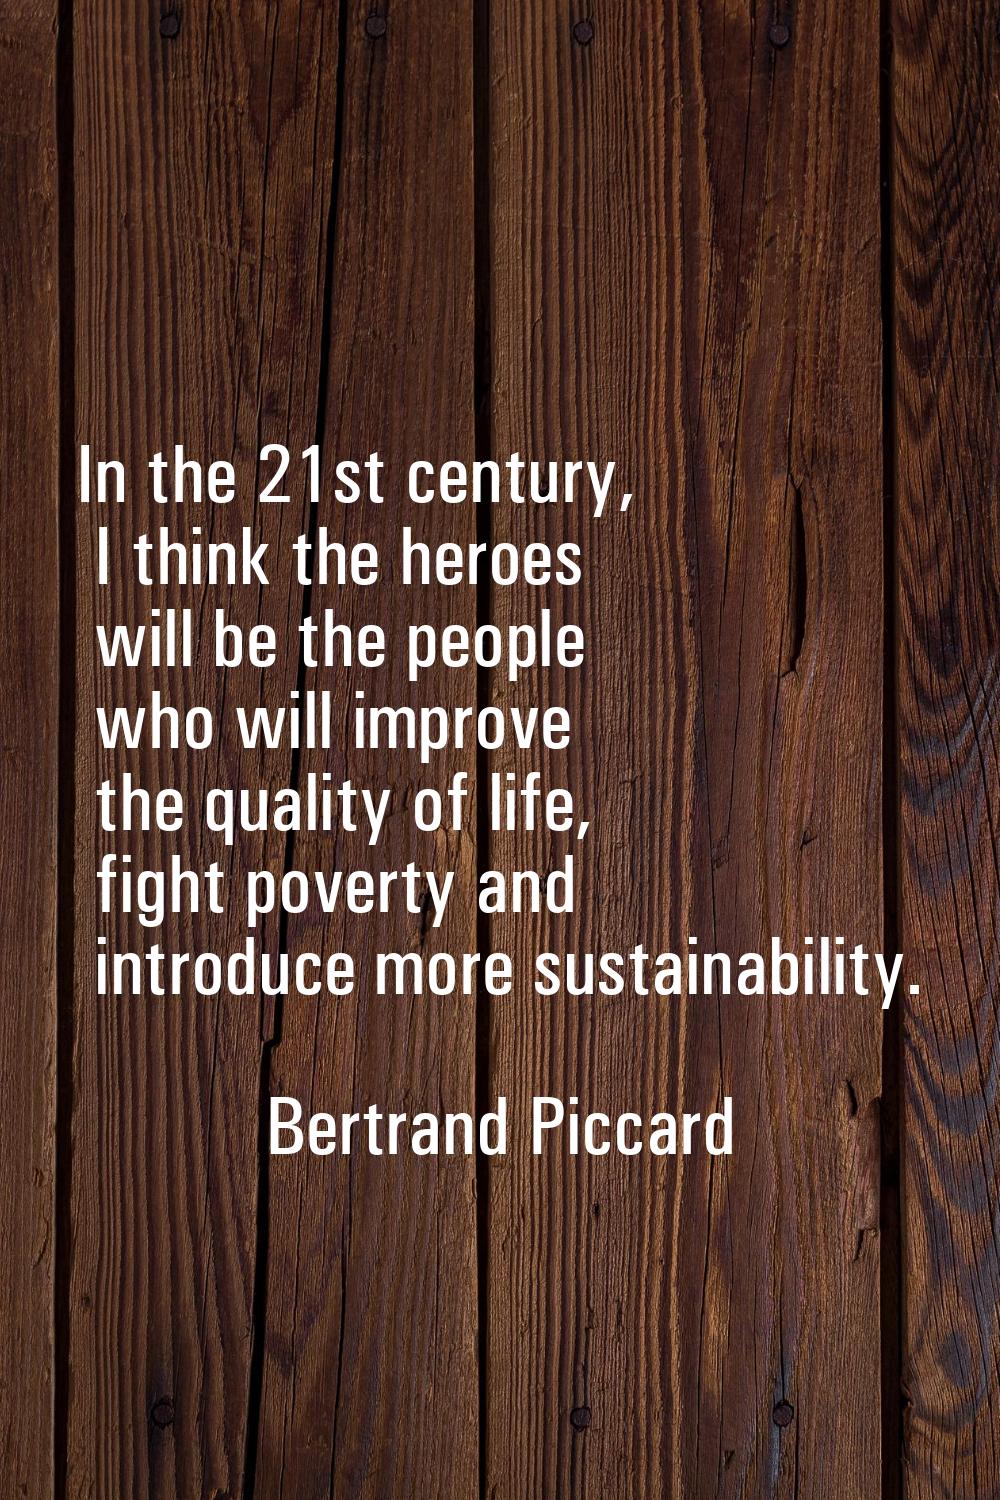 In the 21st century, I think the heroes will be the people who will improve the quality of life, fi